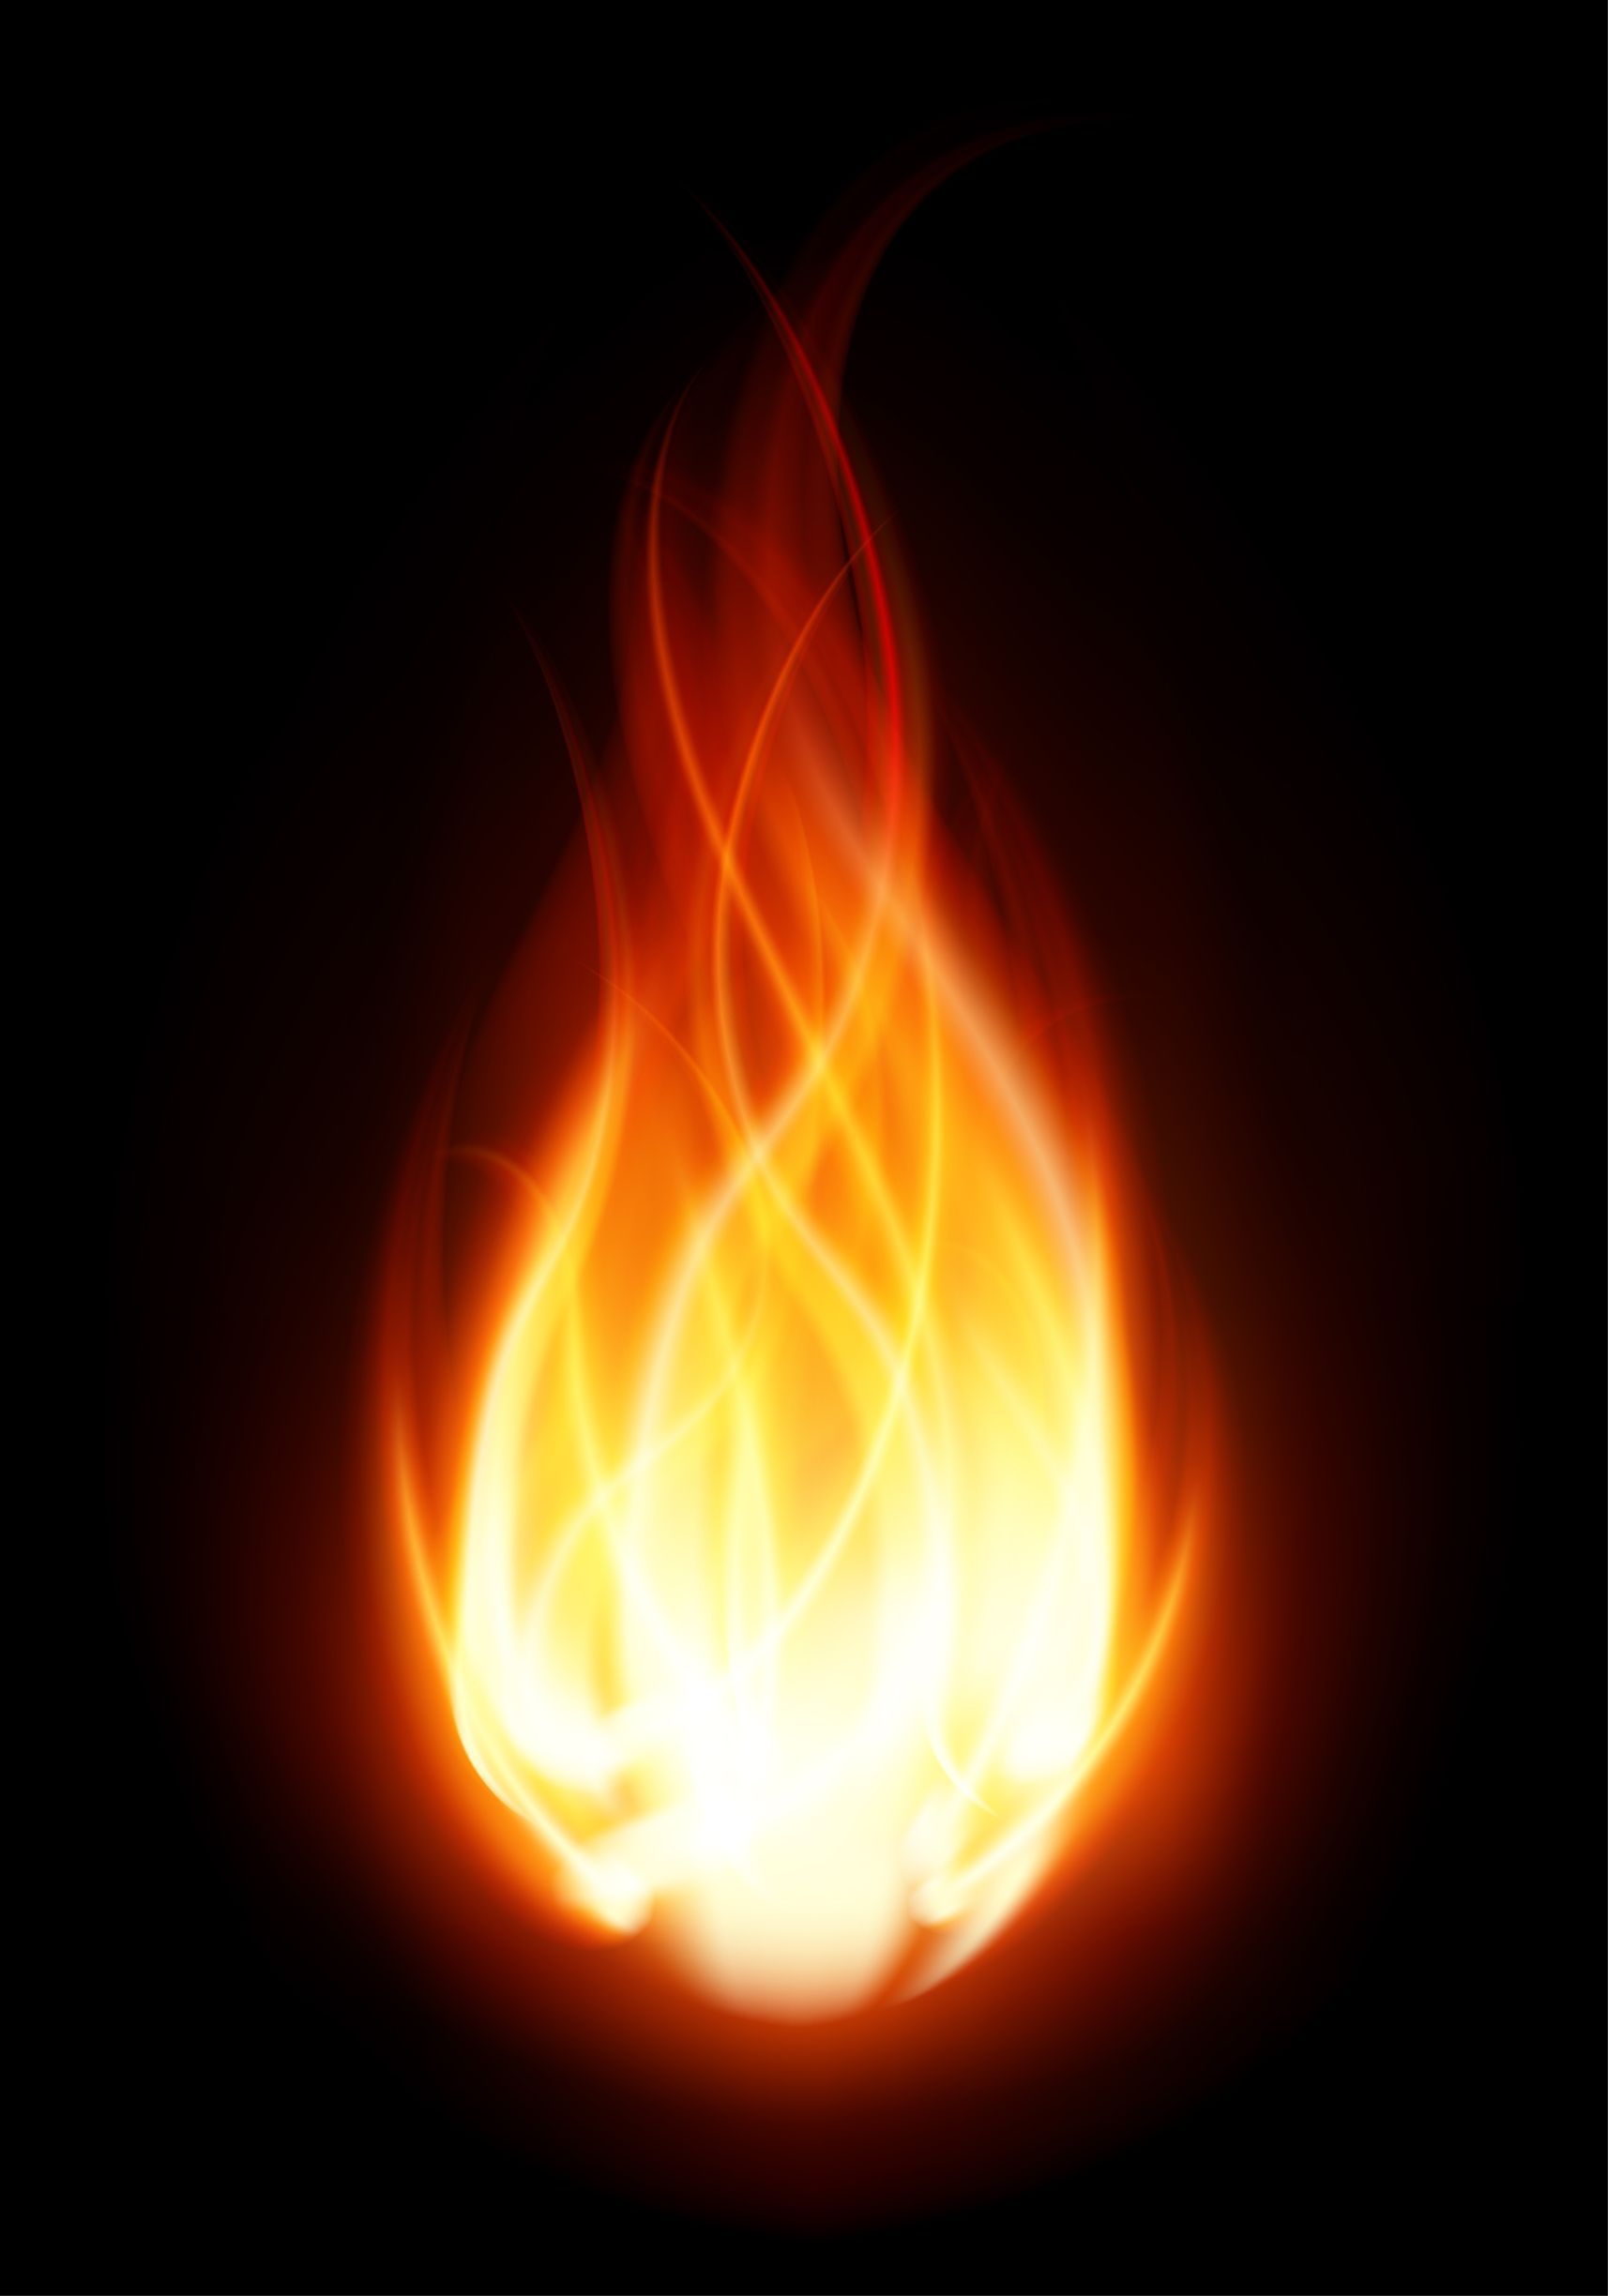 Fire Wallpaper Download More From Store Apps Details?id=com.andronicus.coolwallpaper. Fire, Cool Wallpaper, Flames